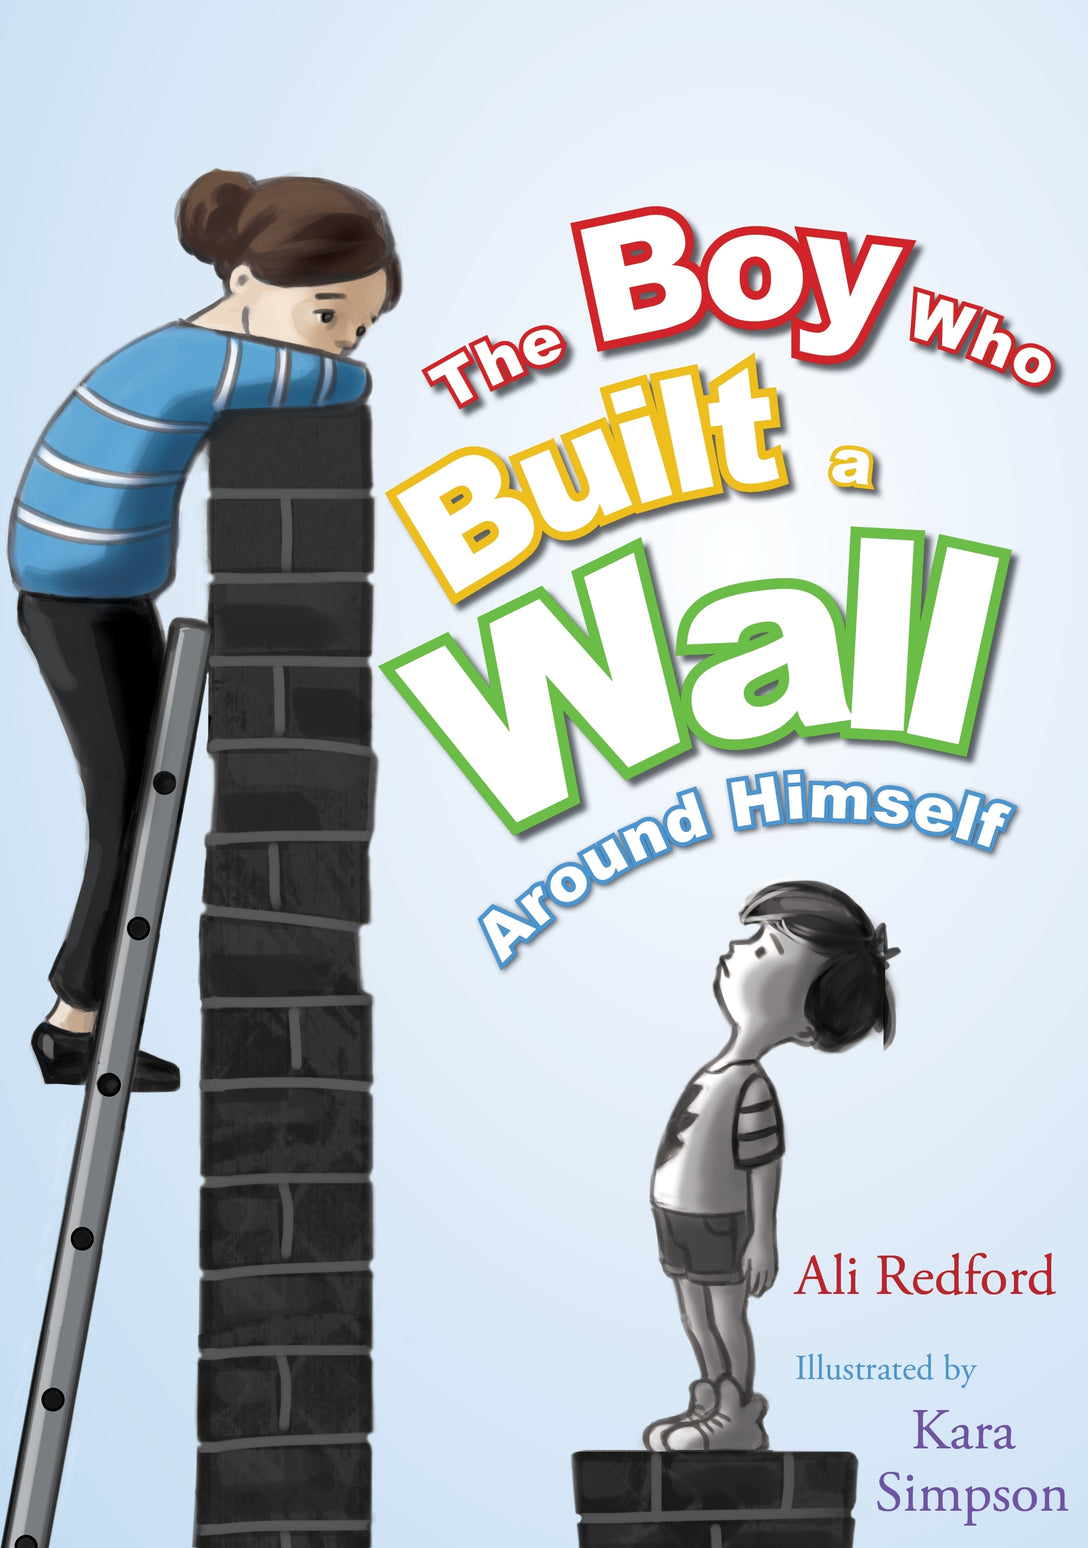 The Boy Who Built a Wall Around Himself by Kara Simpson, Alison Redford